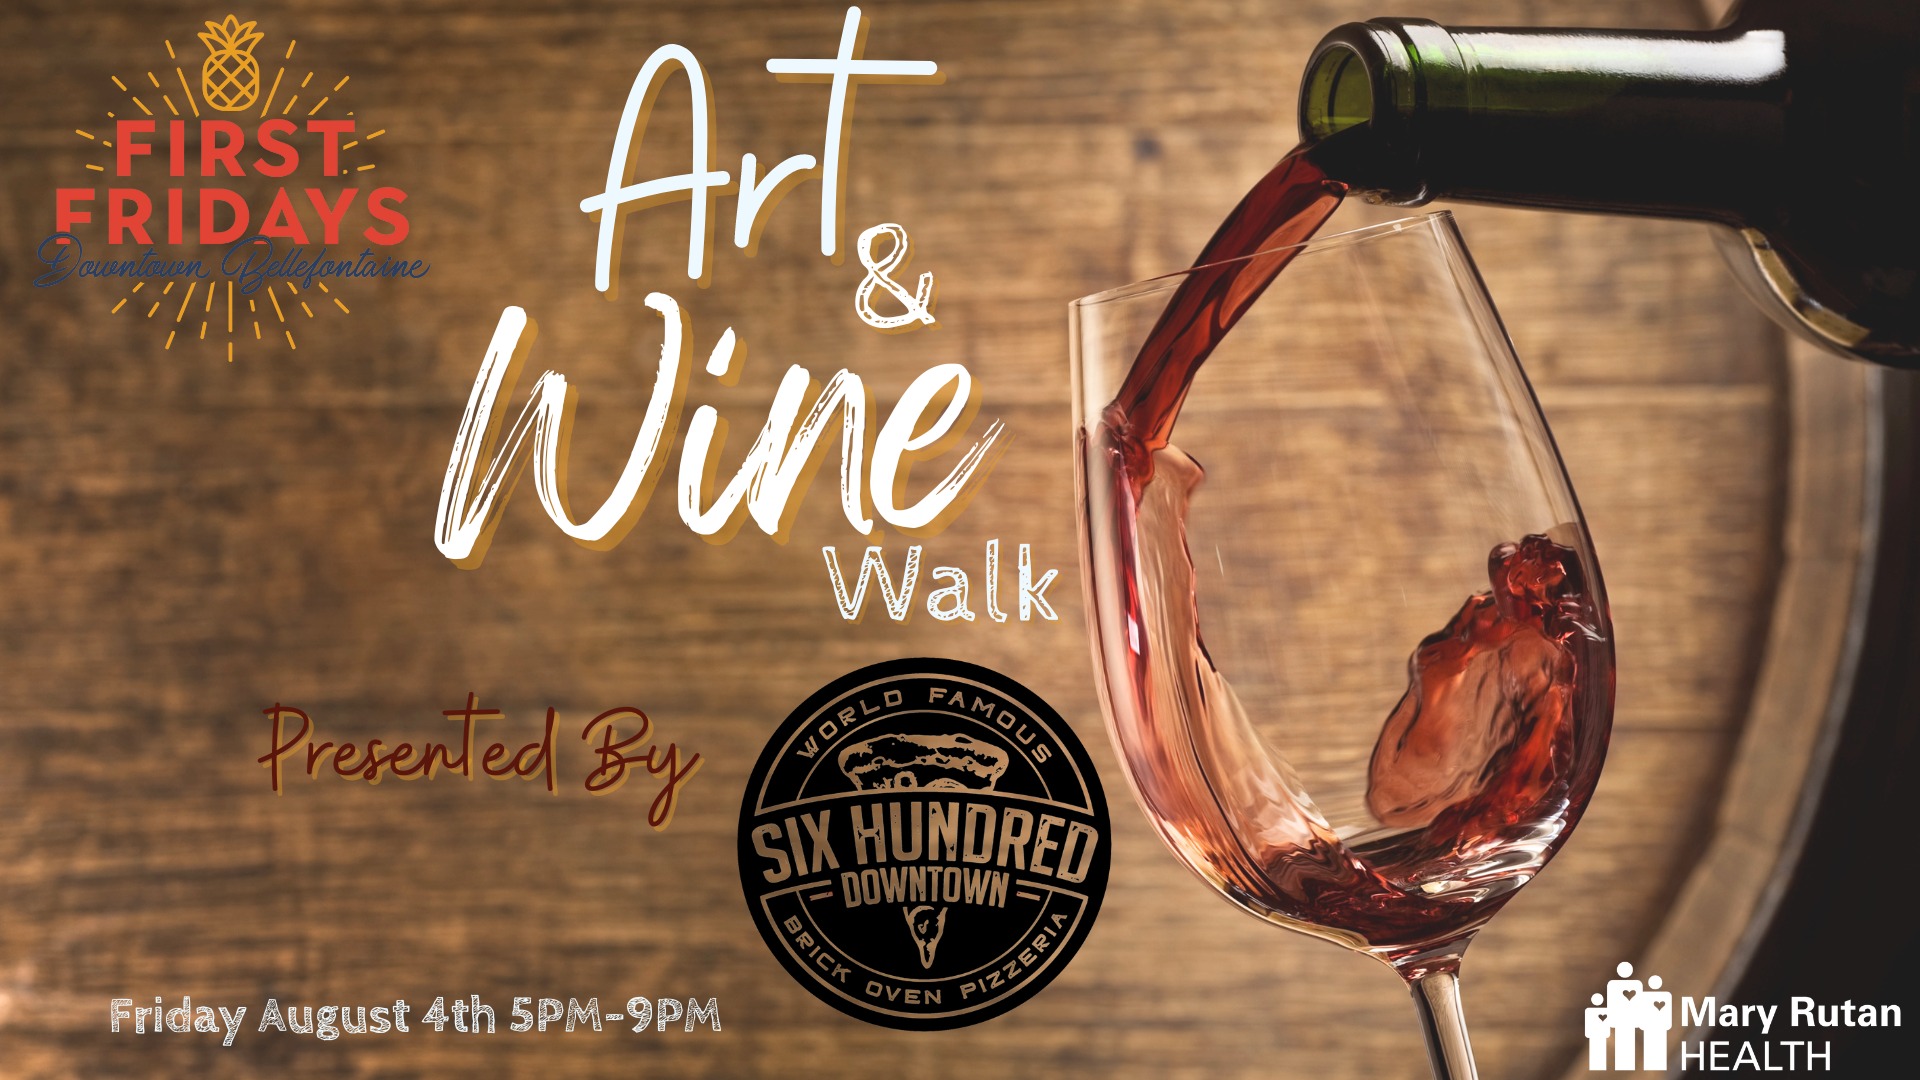 Downtown Bellefontaine Art & Wine Walk Presented by Six Hundred Downtown